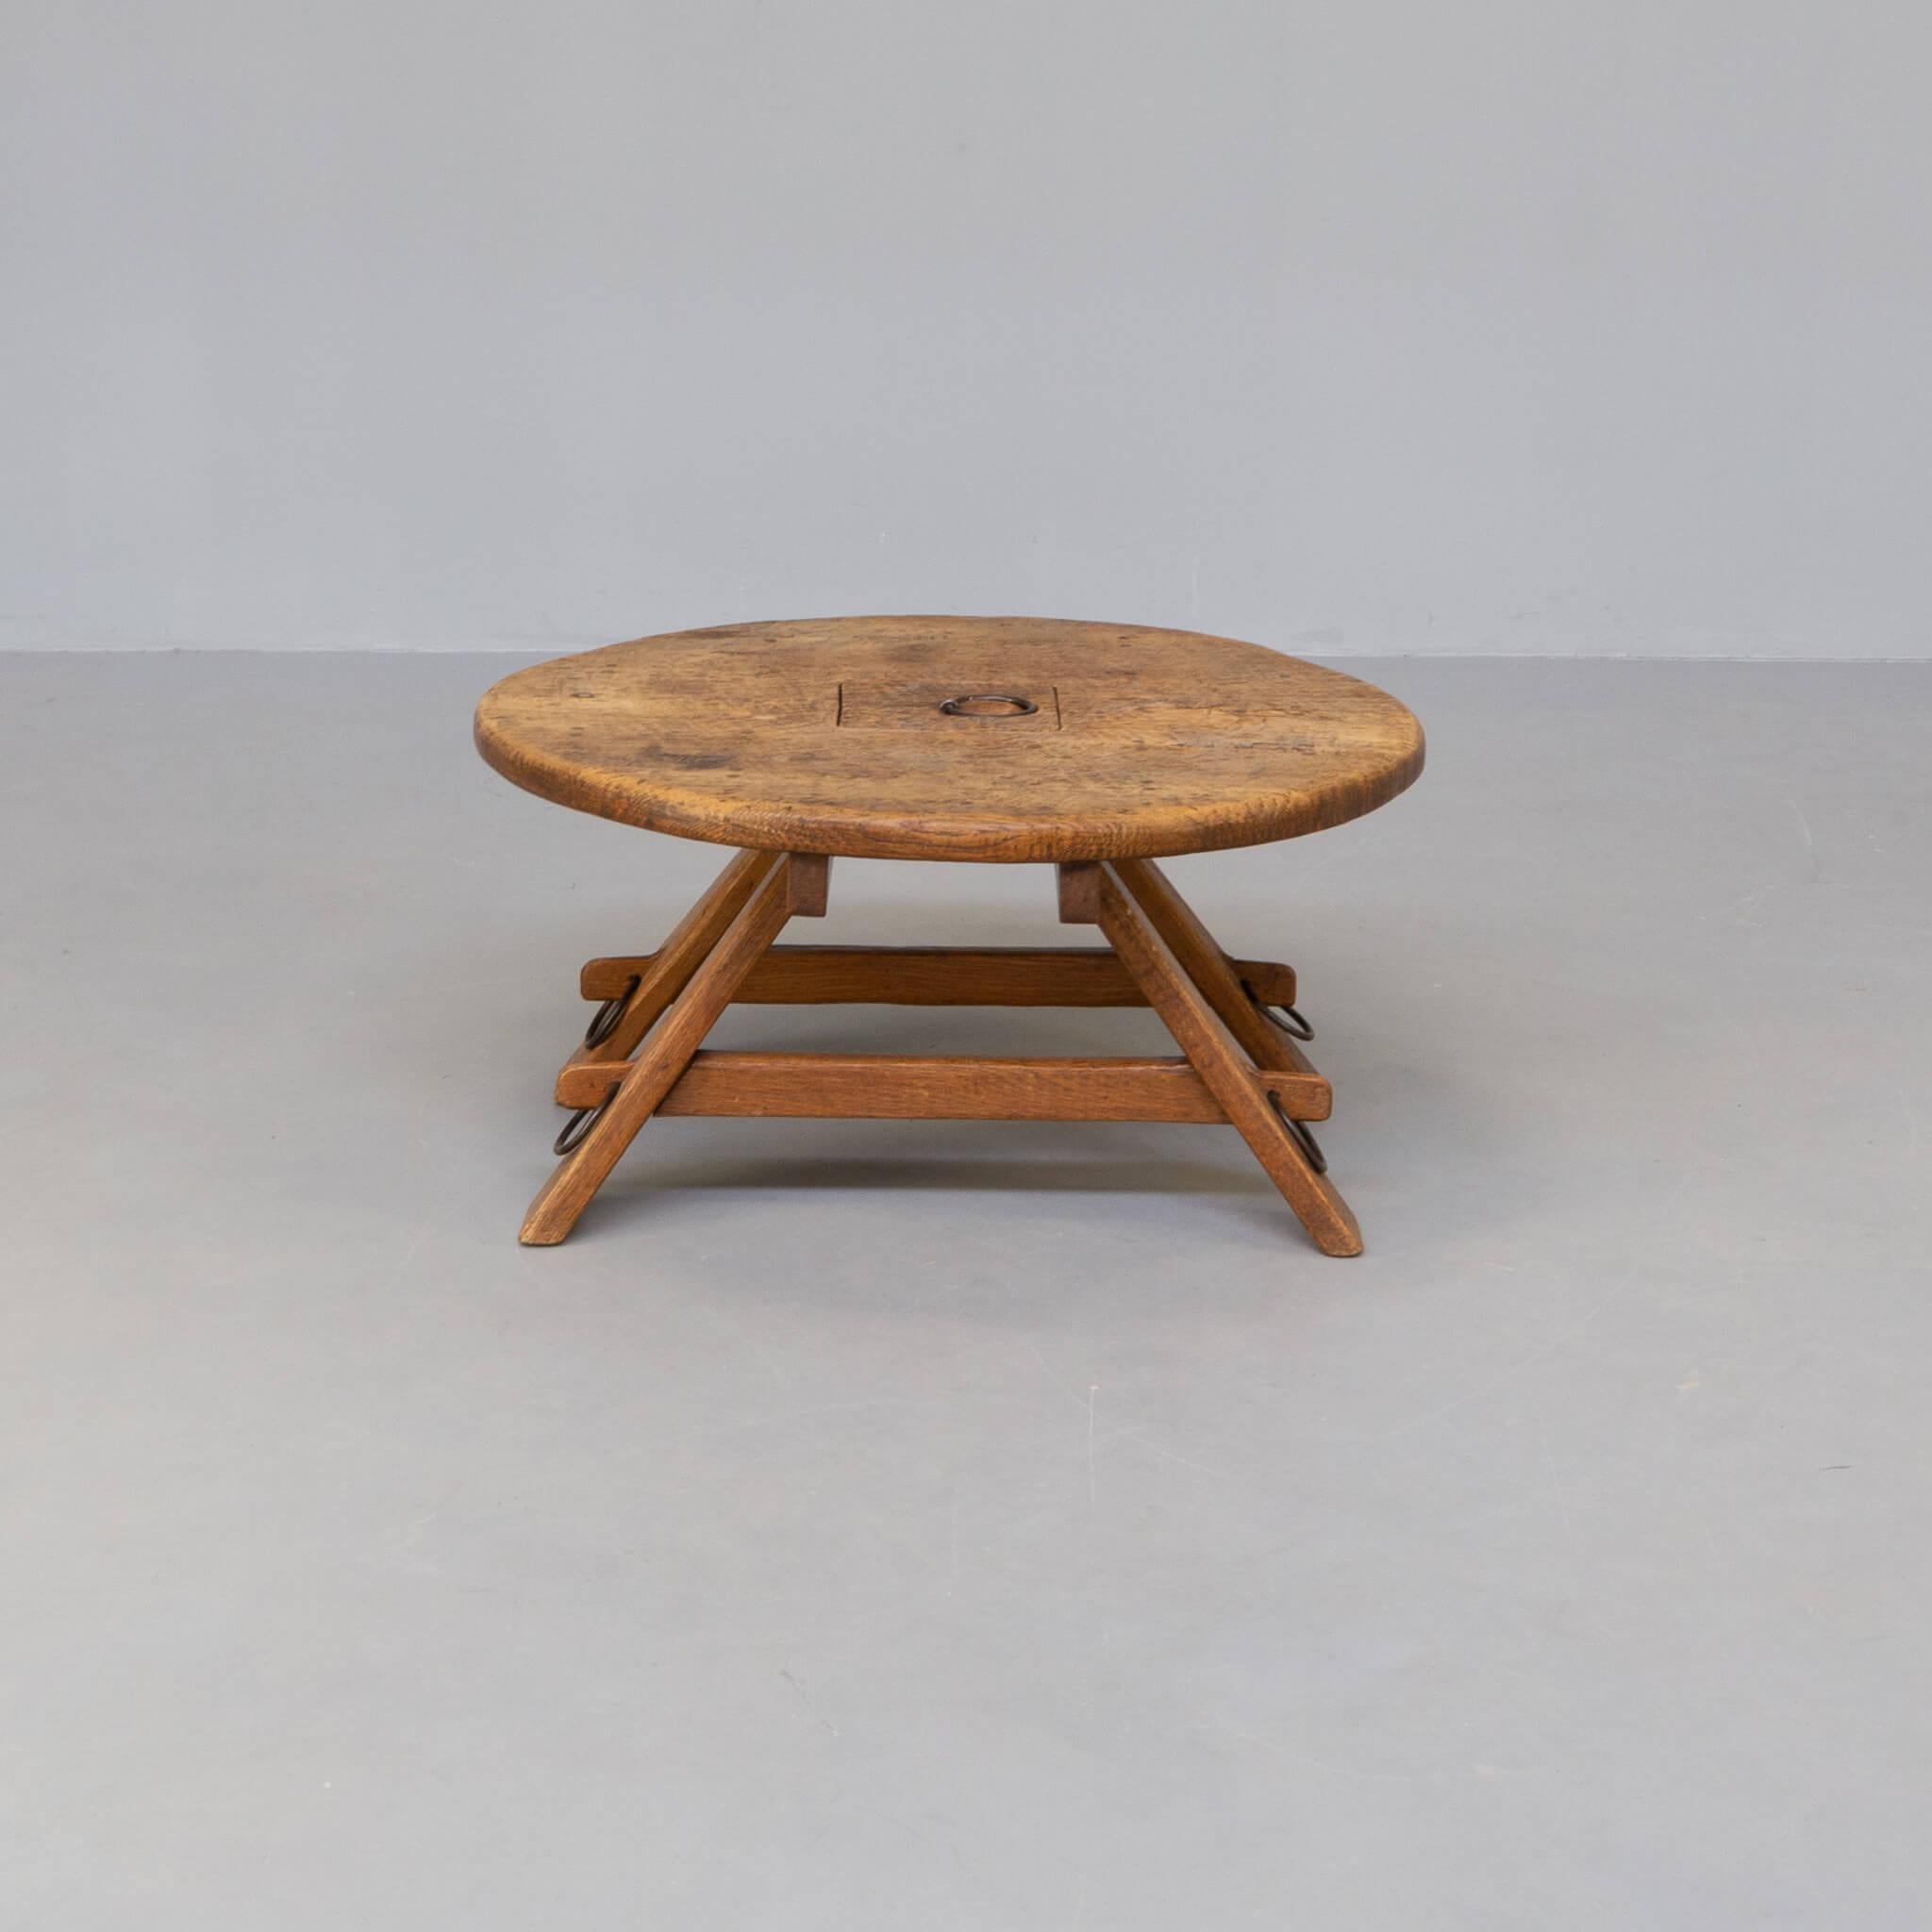 70s Brutalist Oak Round Coffee Table In Good Condition For Sale In Amstelveen, Noord